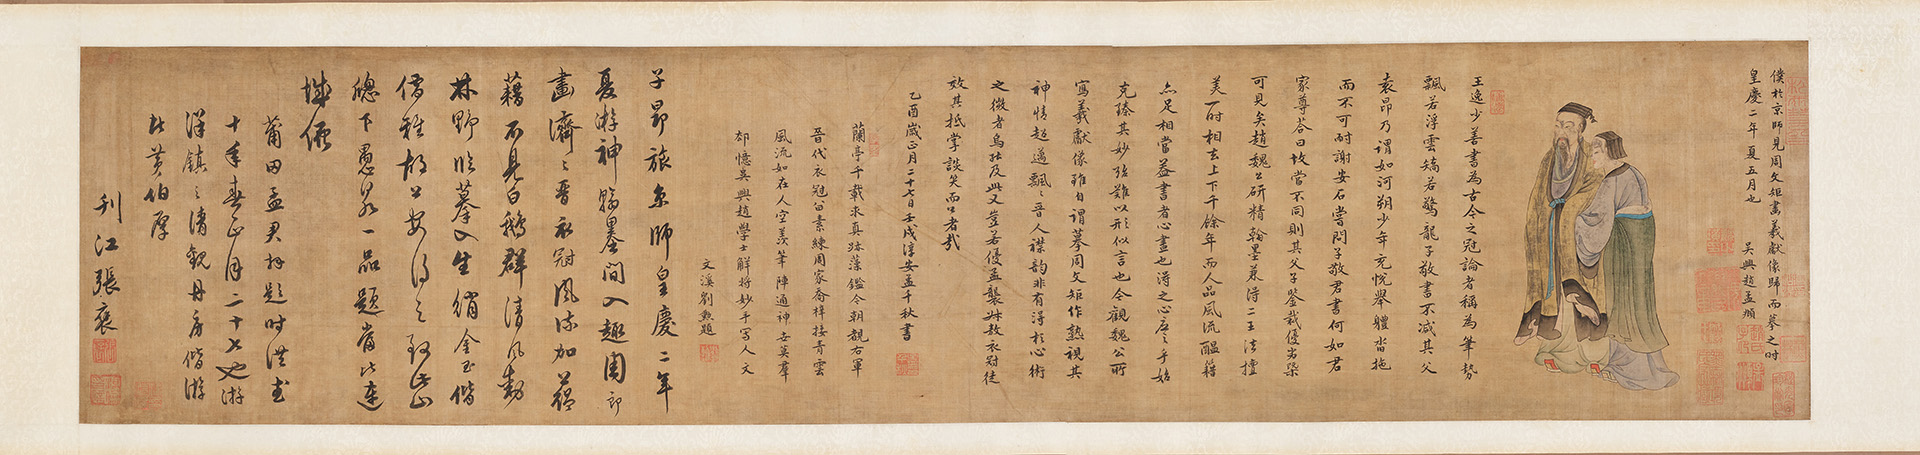 A scroll manuscript in Chinese with illustrations